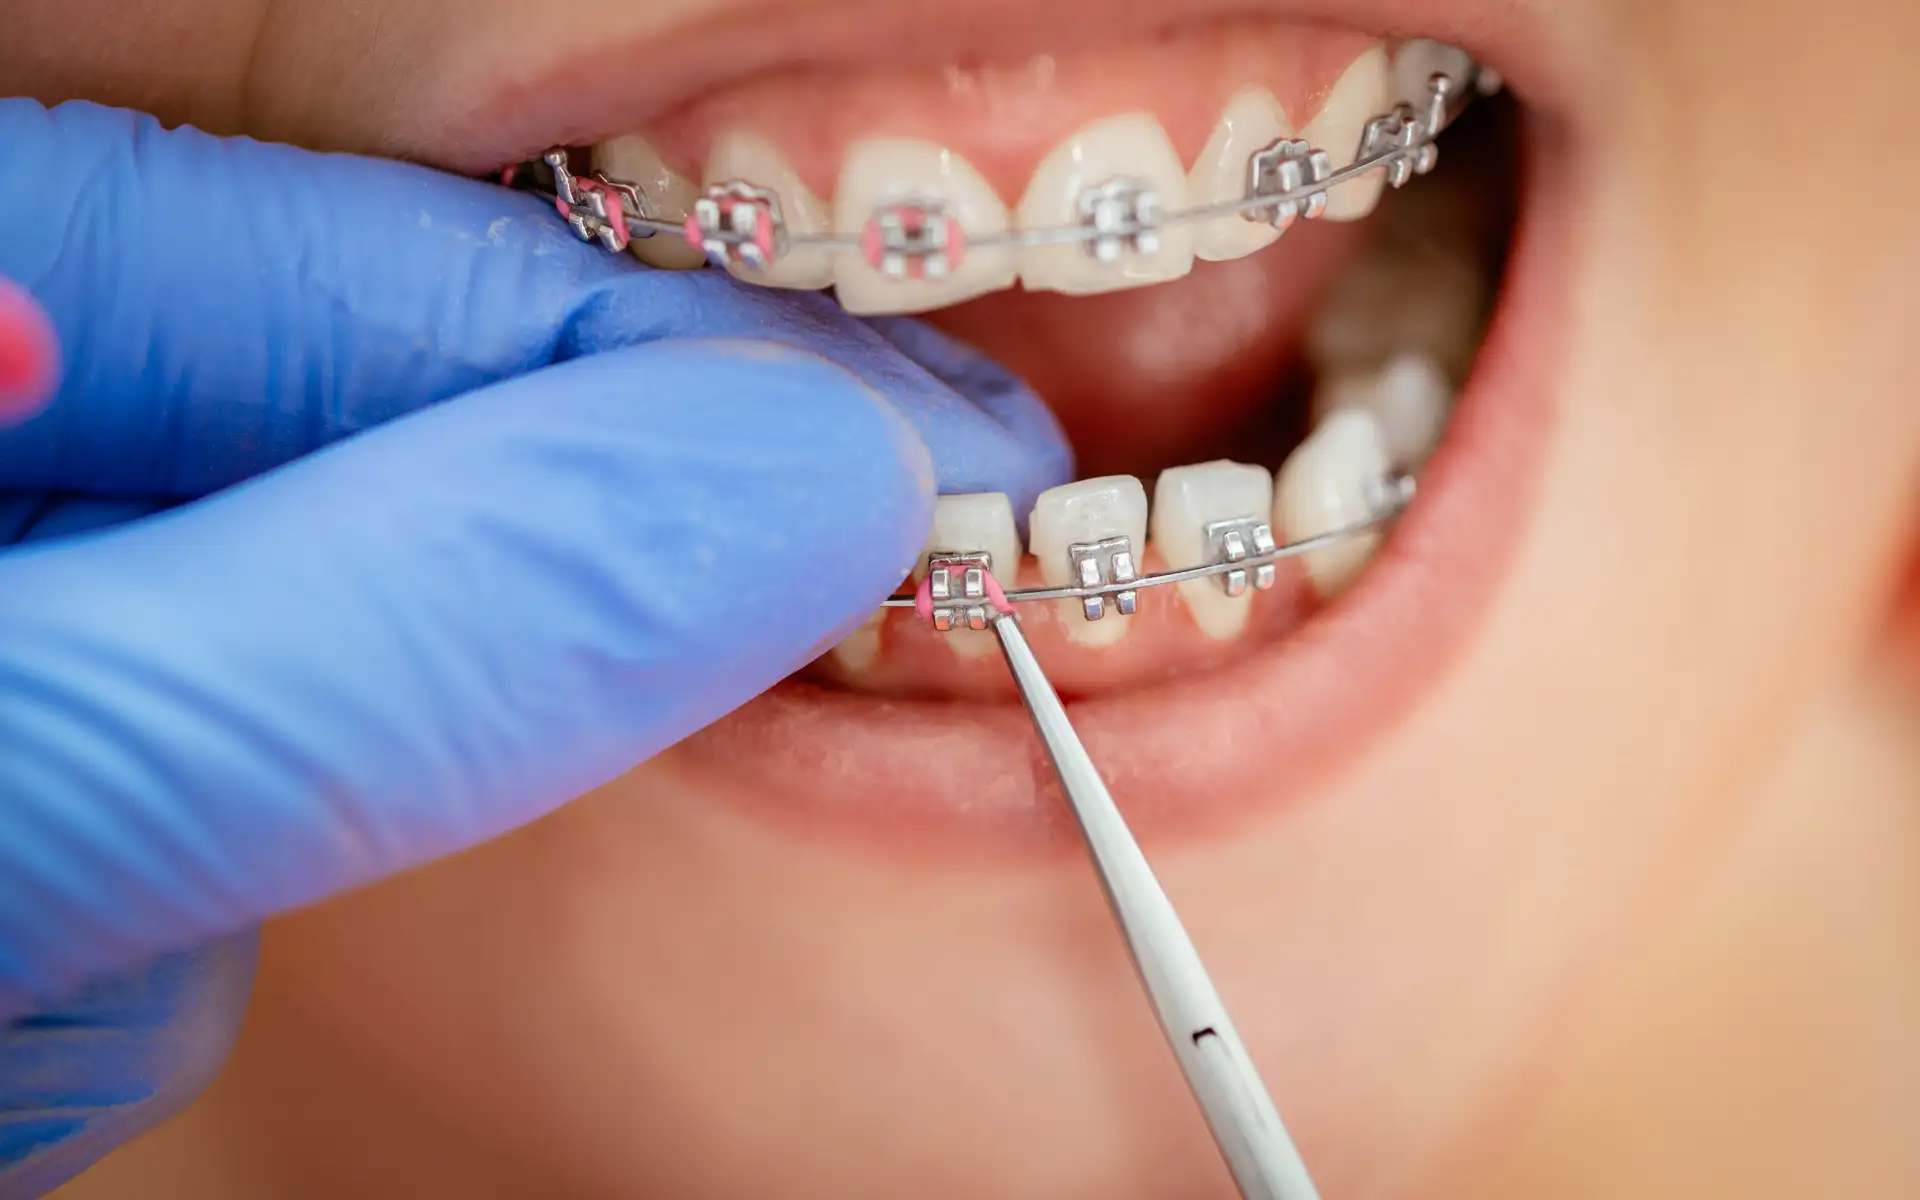 https://homeodent.co.in/wp-content/uploads/2022/10/Homeodent-Teeth-Braces-Borivali-West-for-Adults-and-teens.webp